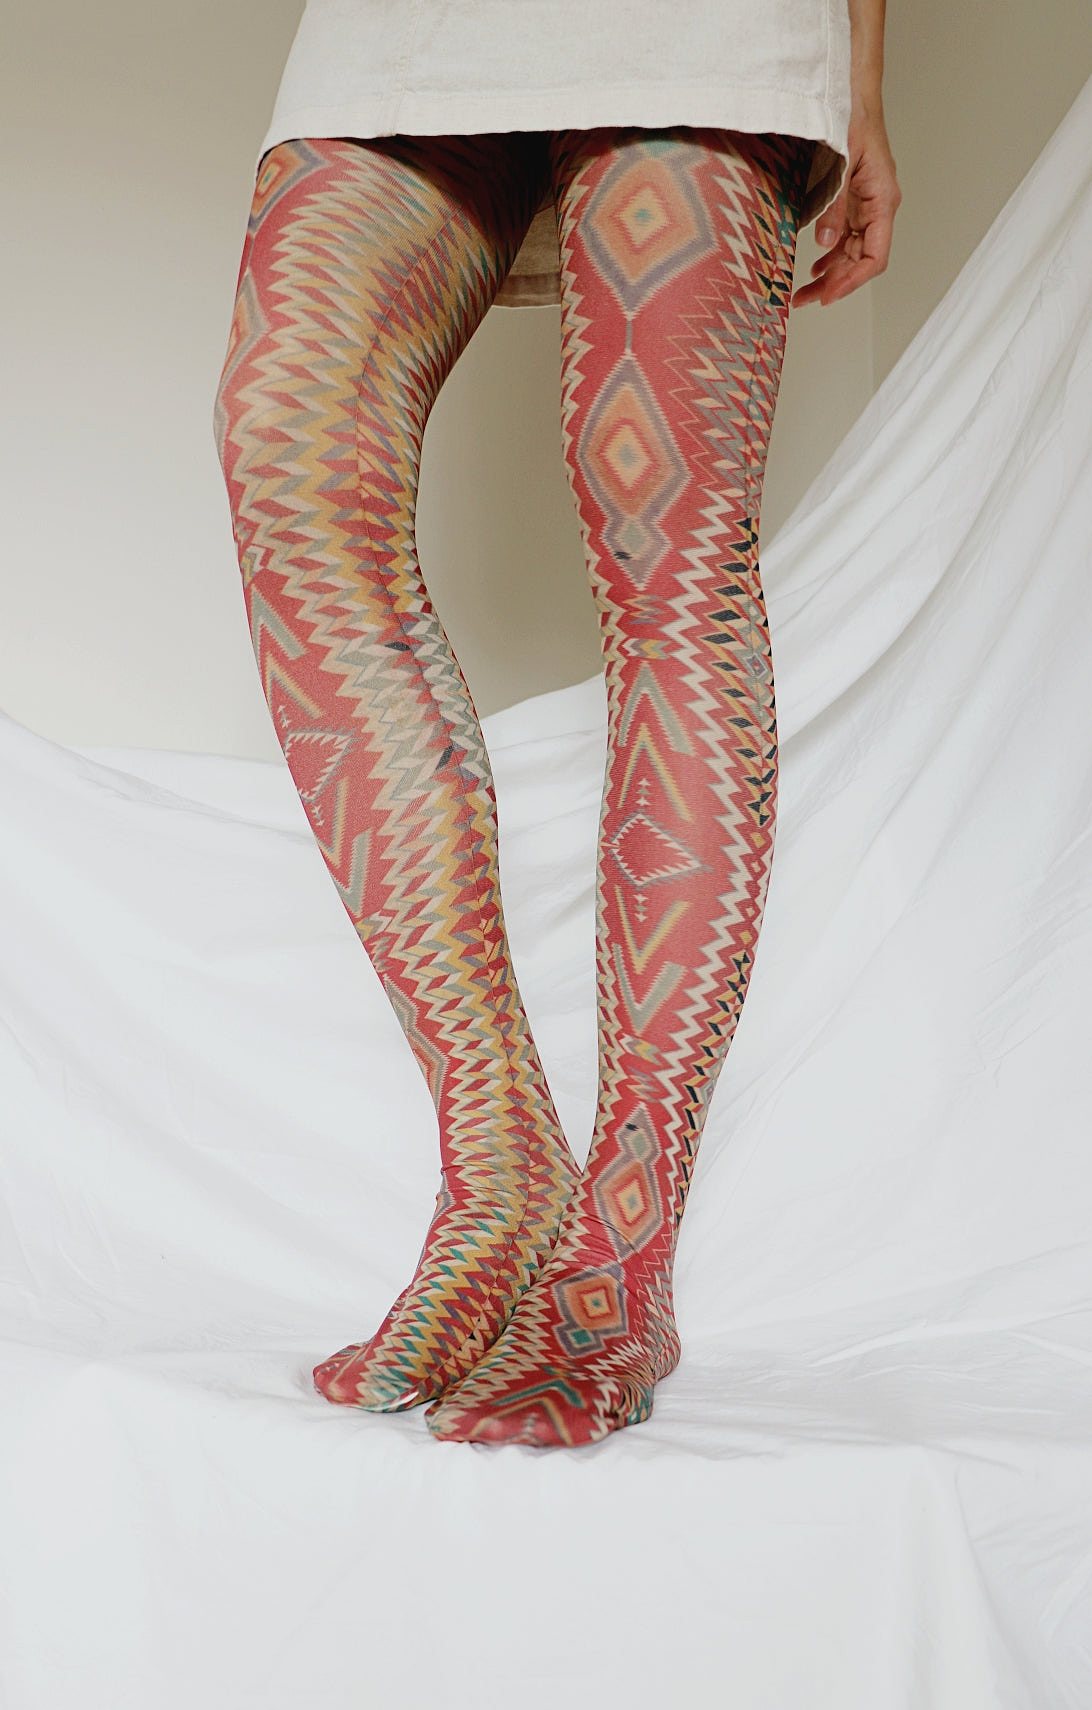 TABBISOCKS brand Germantown Eyedazzler Tights, women's legs wearing tights with an overall orange, geometric pattern.